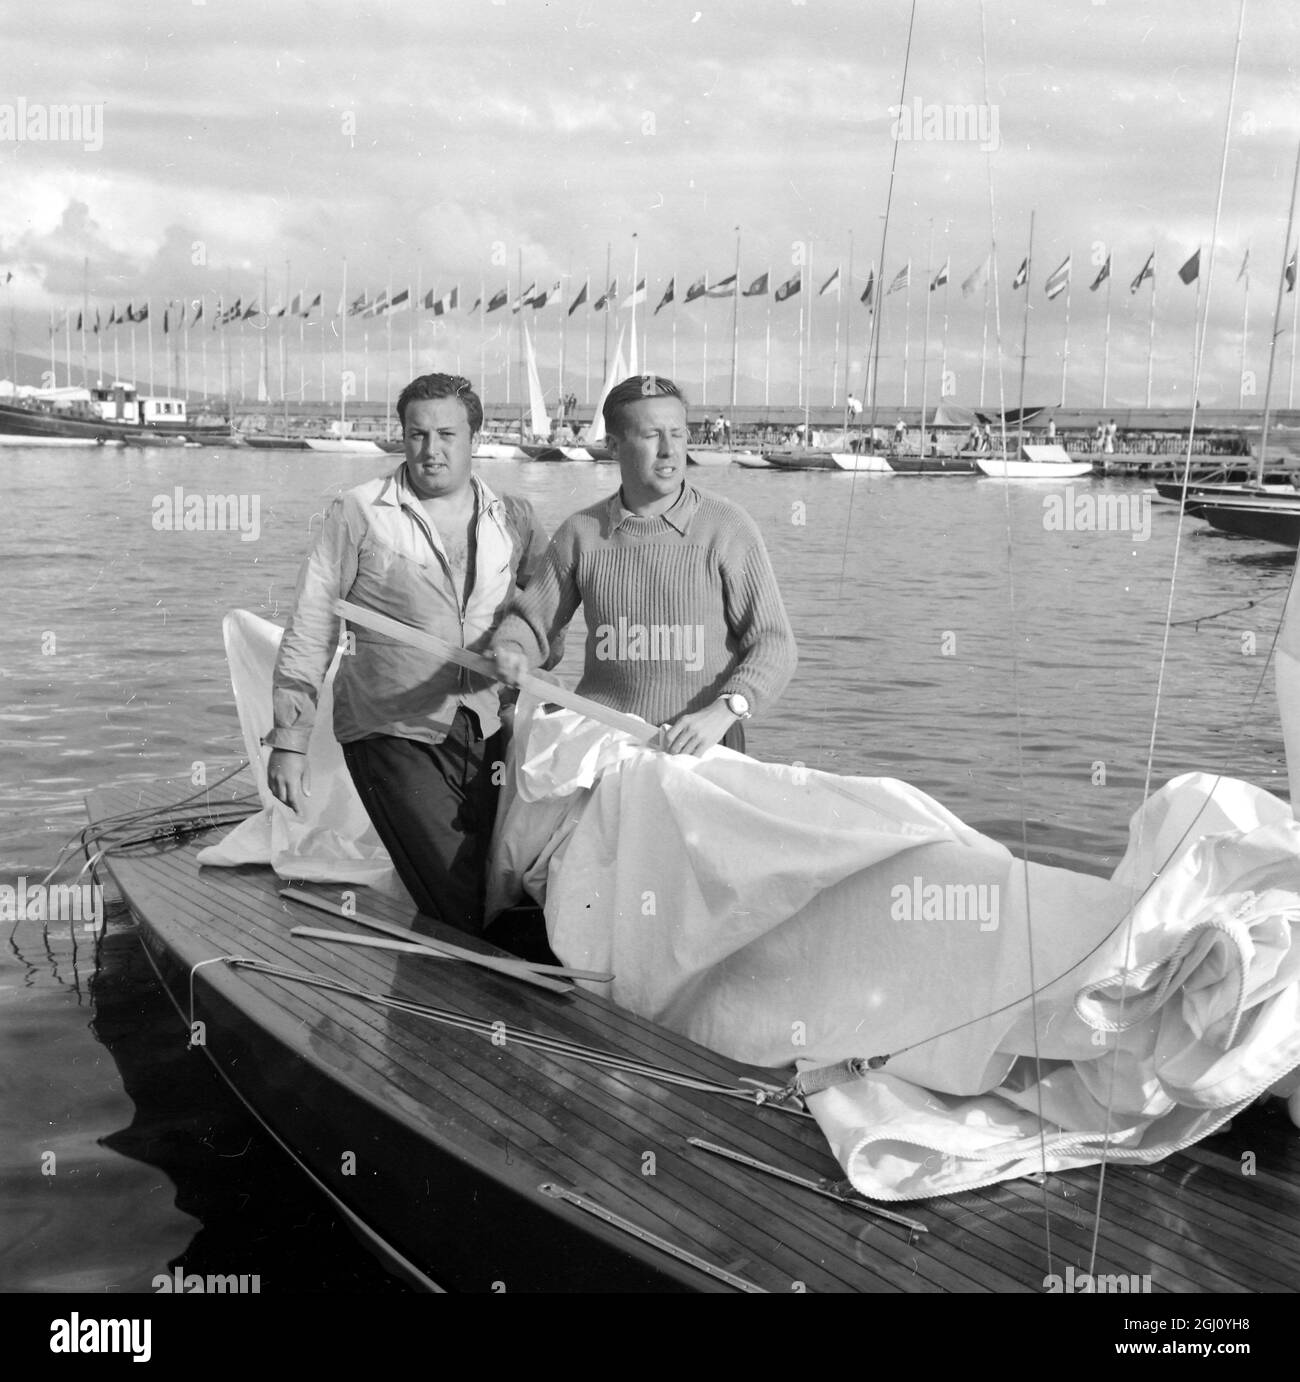 OLYMPIC GAME YACHTING STAR CLASS PORTUGUSES TEAM WINS QUIN & QUINA 8 SEPTEMBER 1960 Stock Photo